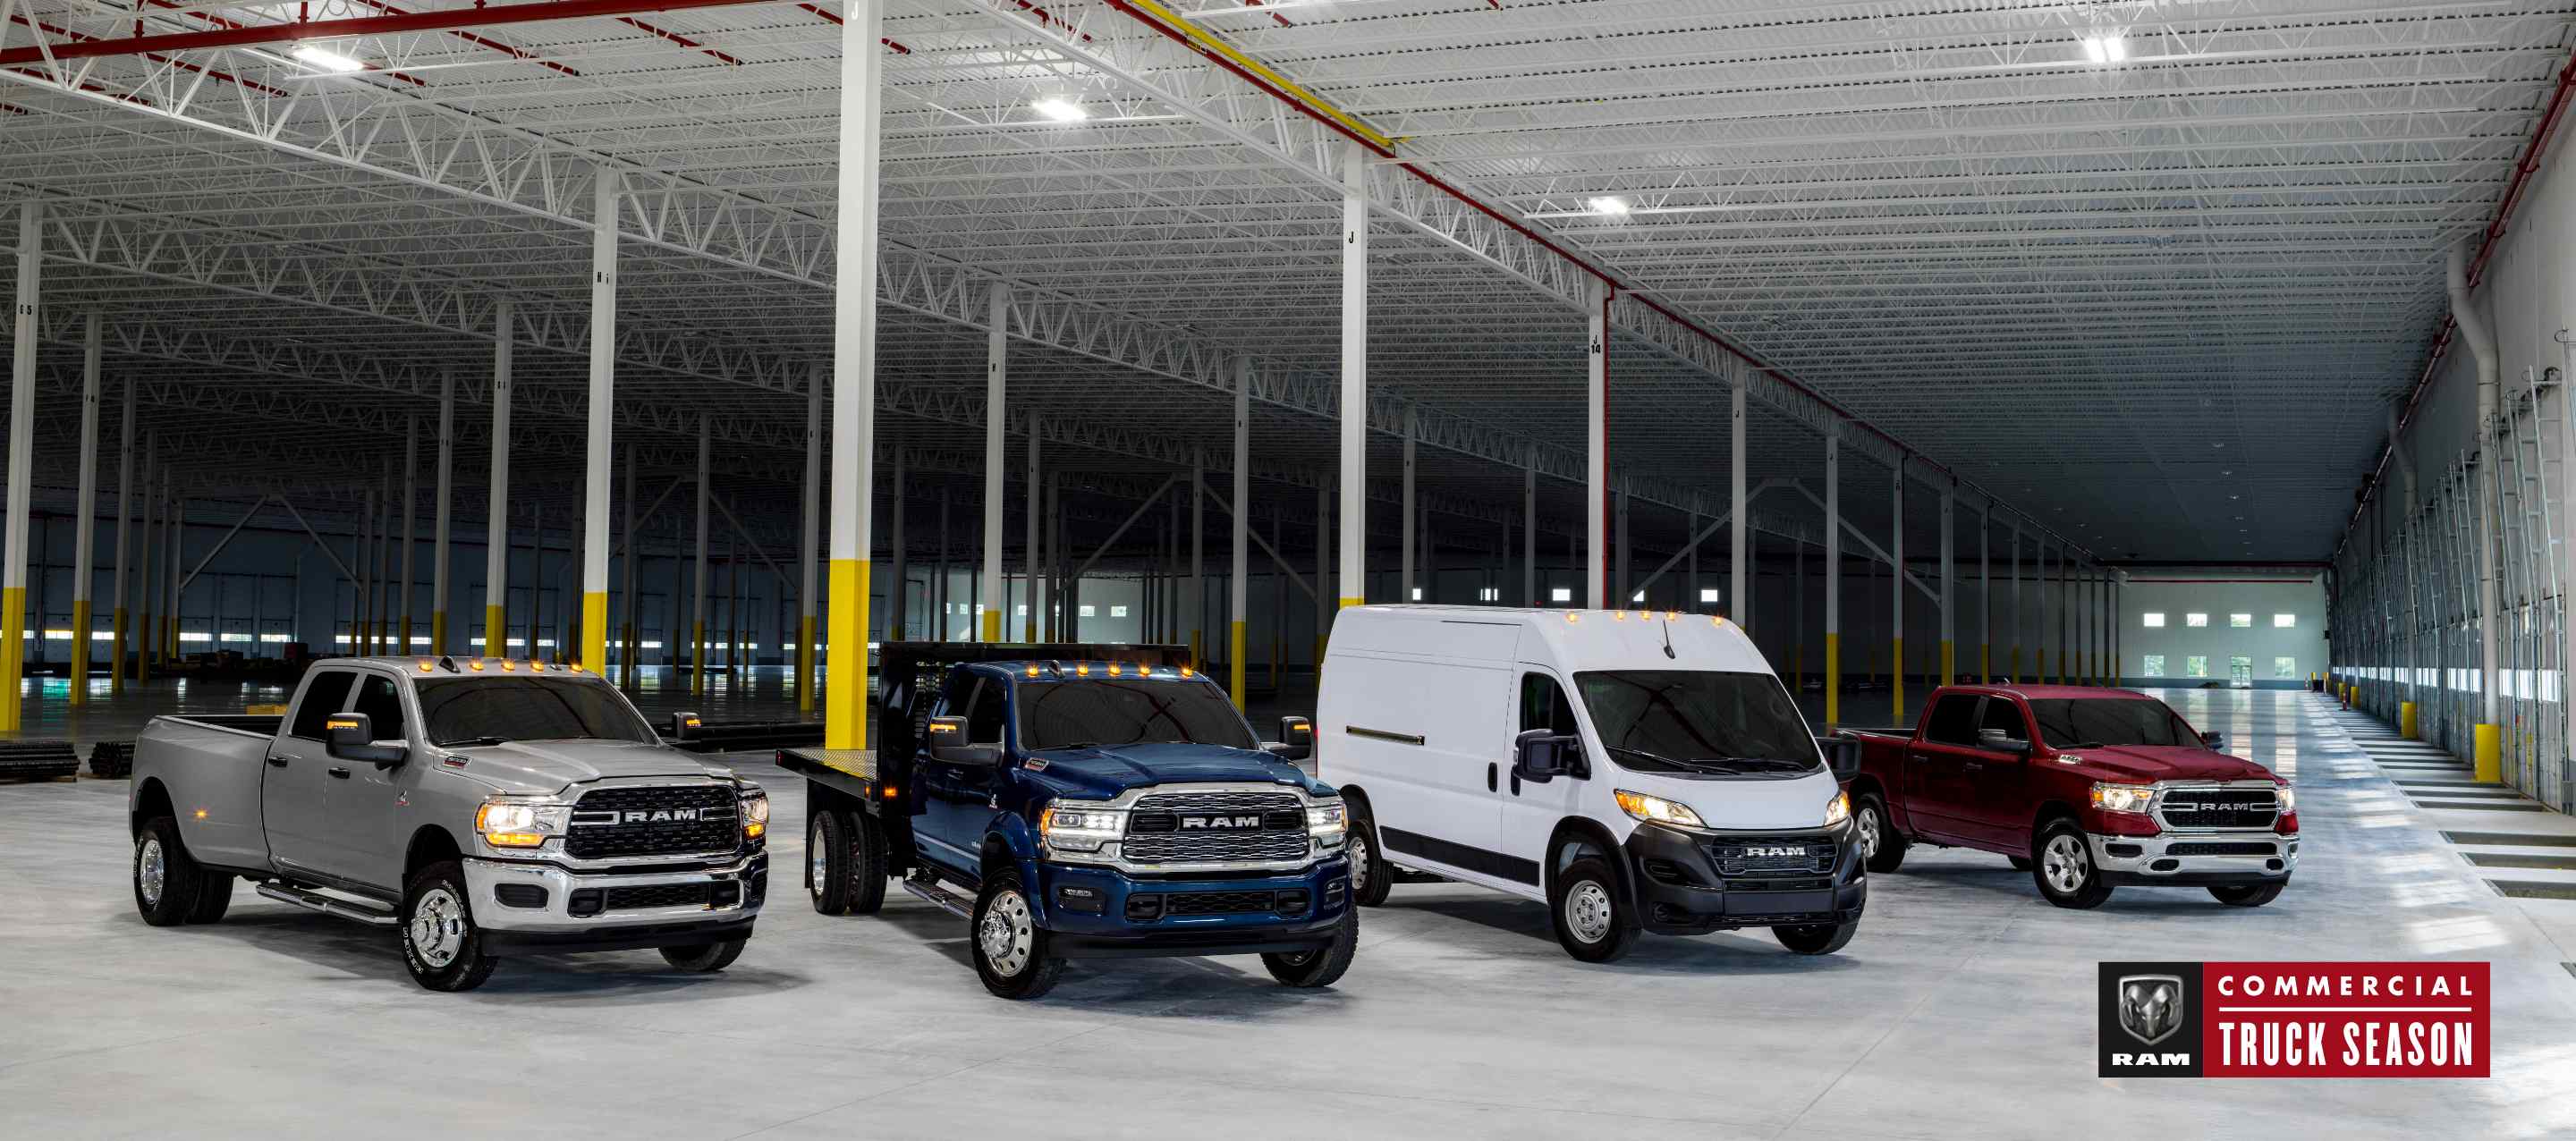 A lineup of four Ram Brand vehicles parked in an industrial garage. From left to right: a silver 2023 Ram 3500 Big Horn 4x4 Crew Cab, a blue 2023 Ram 5500 Limited 4x4 Chassis Crew Cab with utility bed upfit, a white 2023 Ram ProMaster 2500 Cargo Van High Roof and a red 2023 Ram 1500 Tradesman 4x4 Crew Cab. Ram Commercial Truck Season.